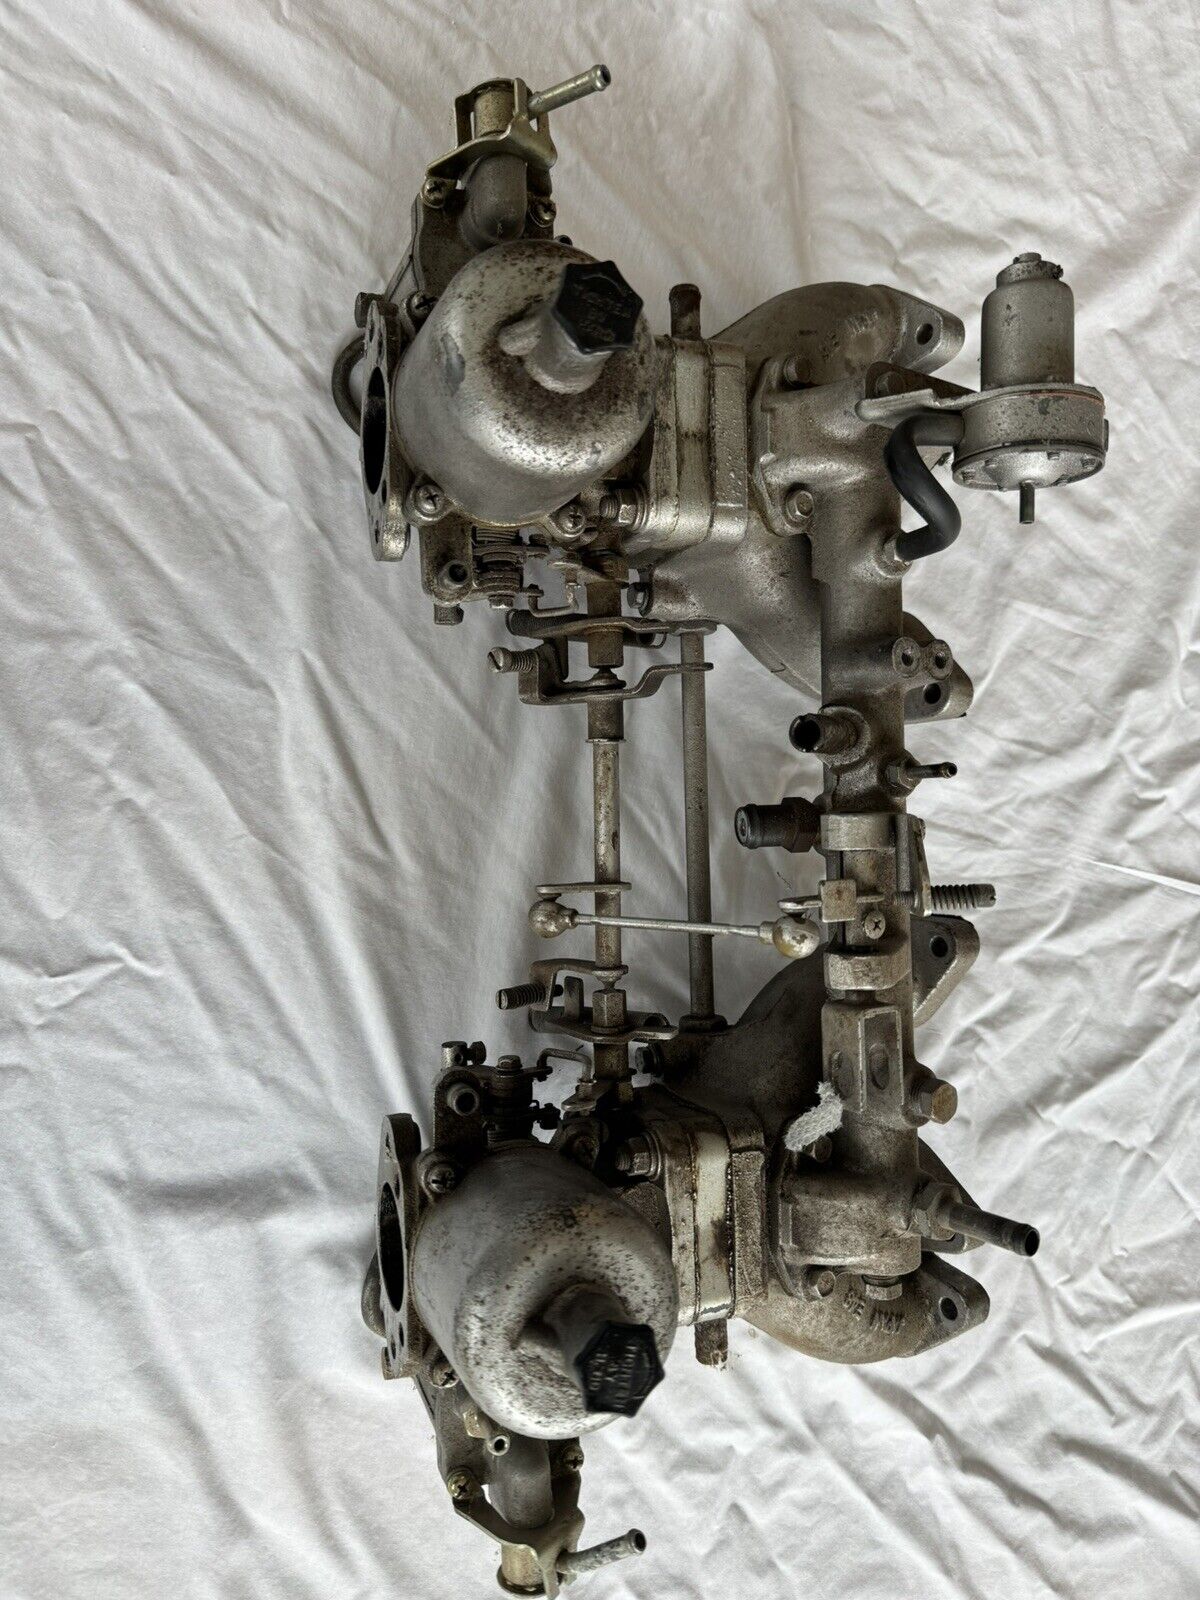 70-71 DATSUN 240z Complete Intake Manifold W/ Round-Top Carbs And Linkage